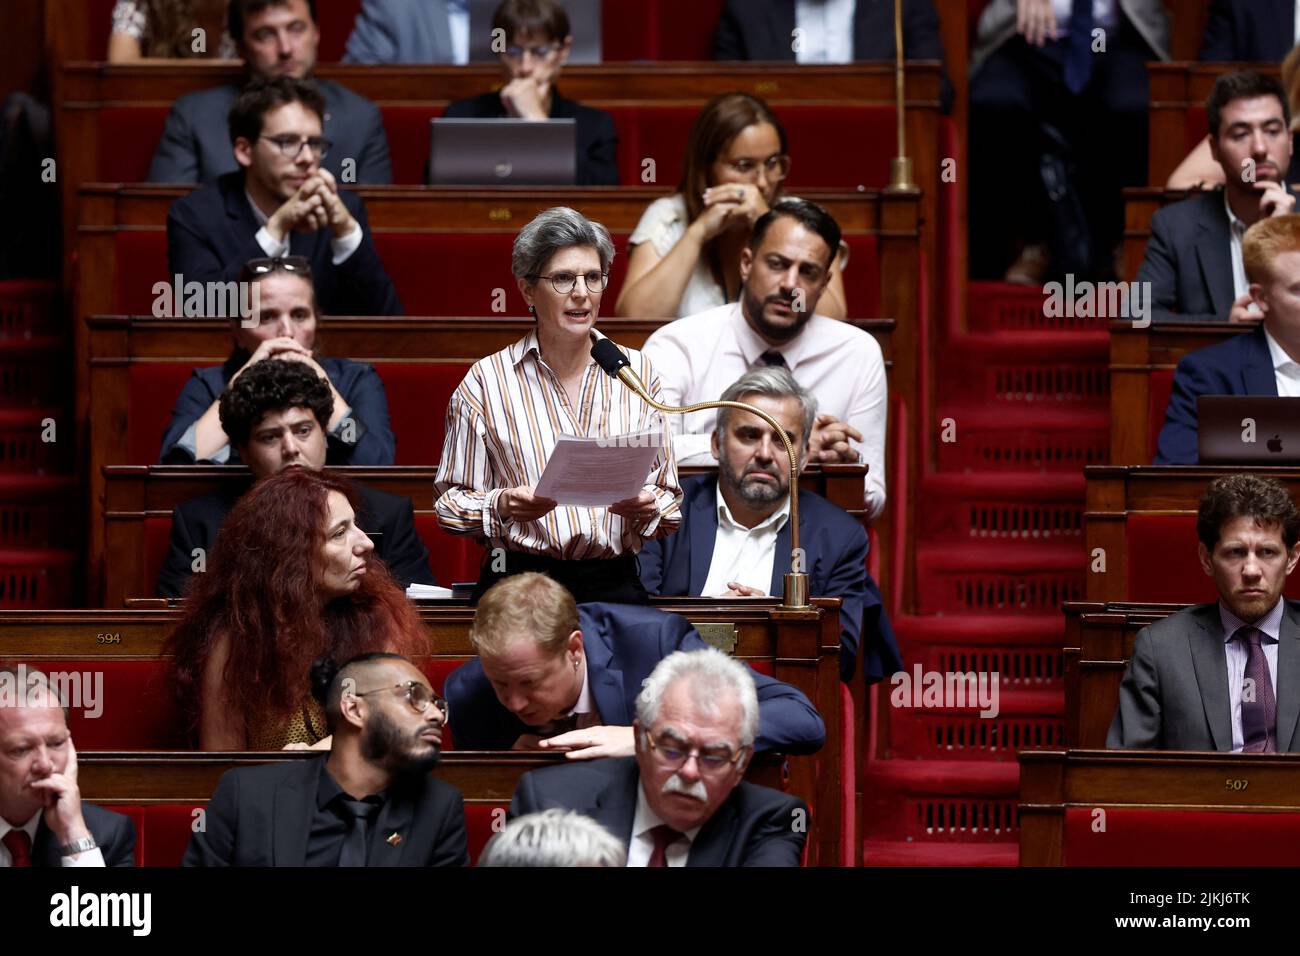 Member of parliament Sandrine Rousseau of the EELV ecologist party and the left-wing coalition NUPES speaks during the questions to the government session at the National Assembly in Paris, France, August 2, 2022. REUTERS/Benoit Tessier Stock Photo